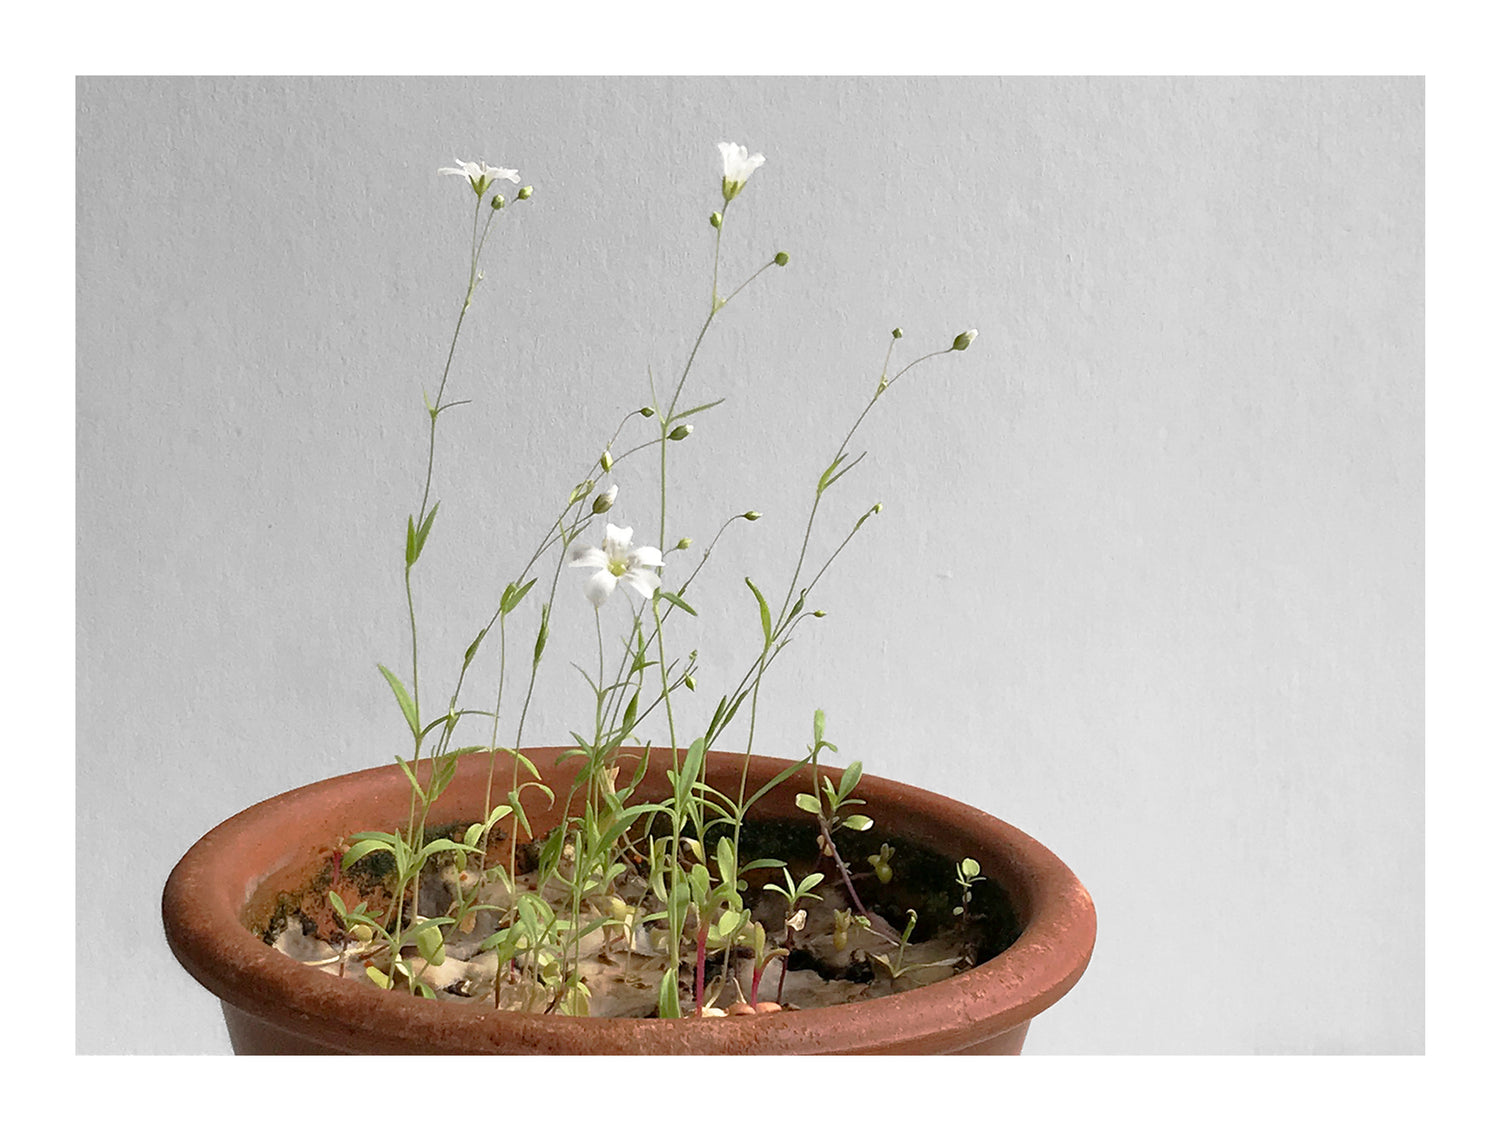 Image shows Wildflowers growing from a Bloom Cards plantable Wildflower seed card that has been planted in a terracotta pot.